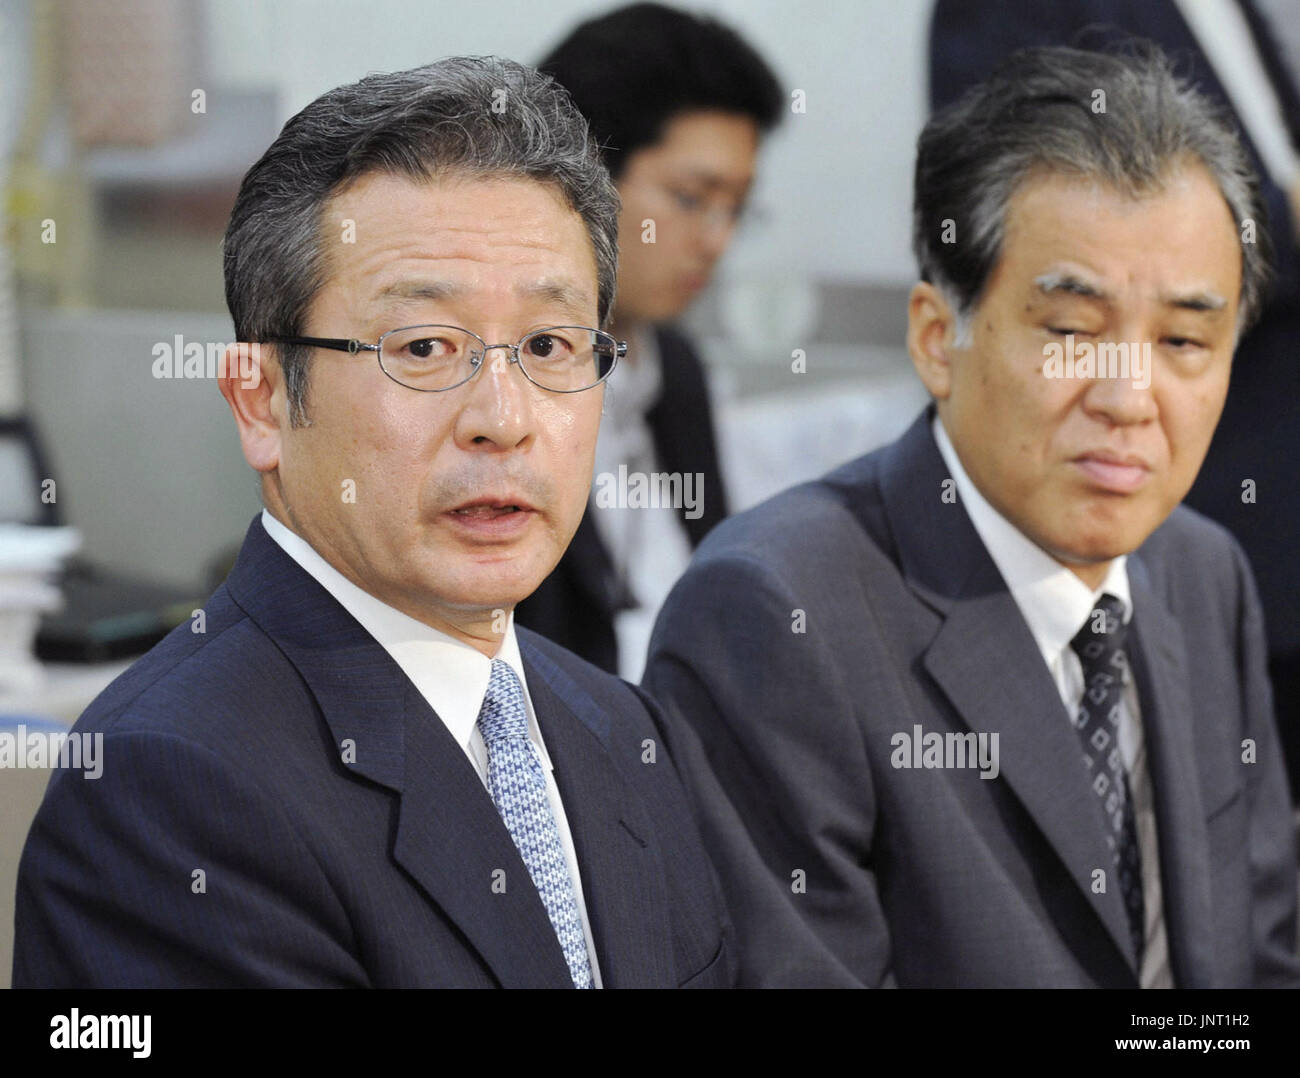 TOKYO, Japan - Go Egami (L), new president of the Incubator Bank of Japan,  shows a stern look during a news conference at the Bank of Japan's  headquarters in Tokyo on July